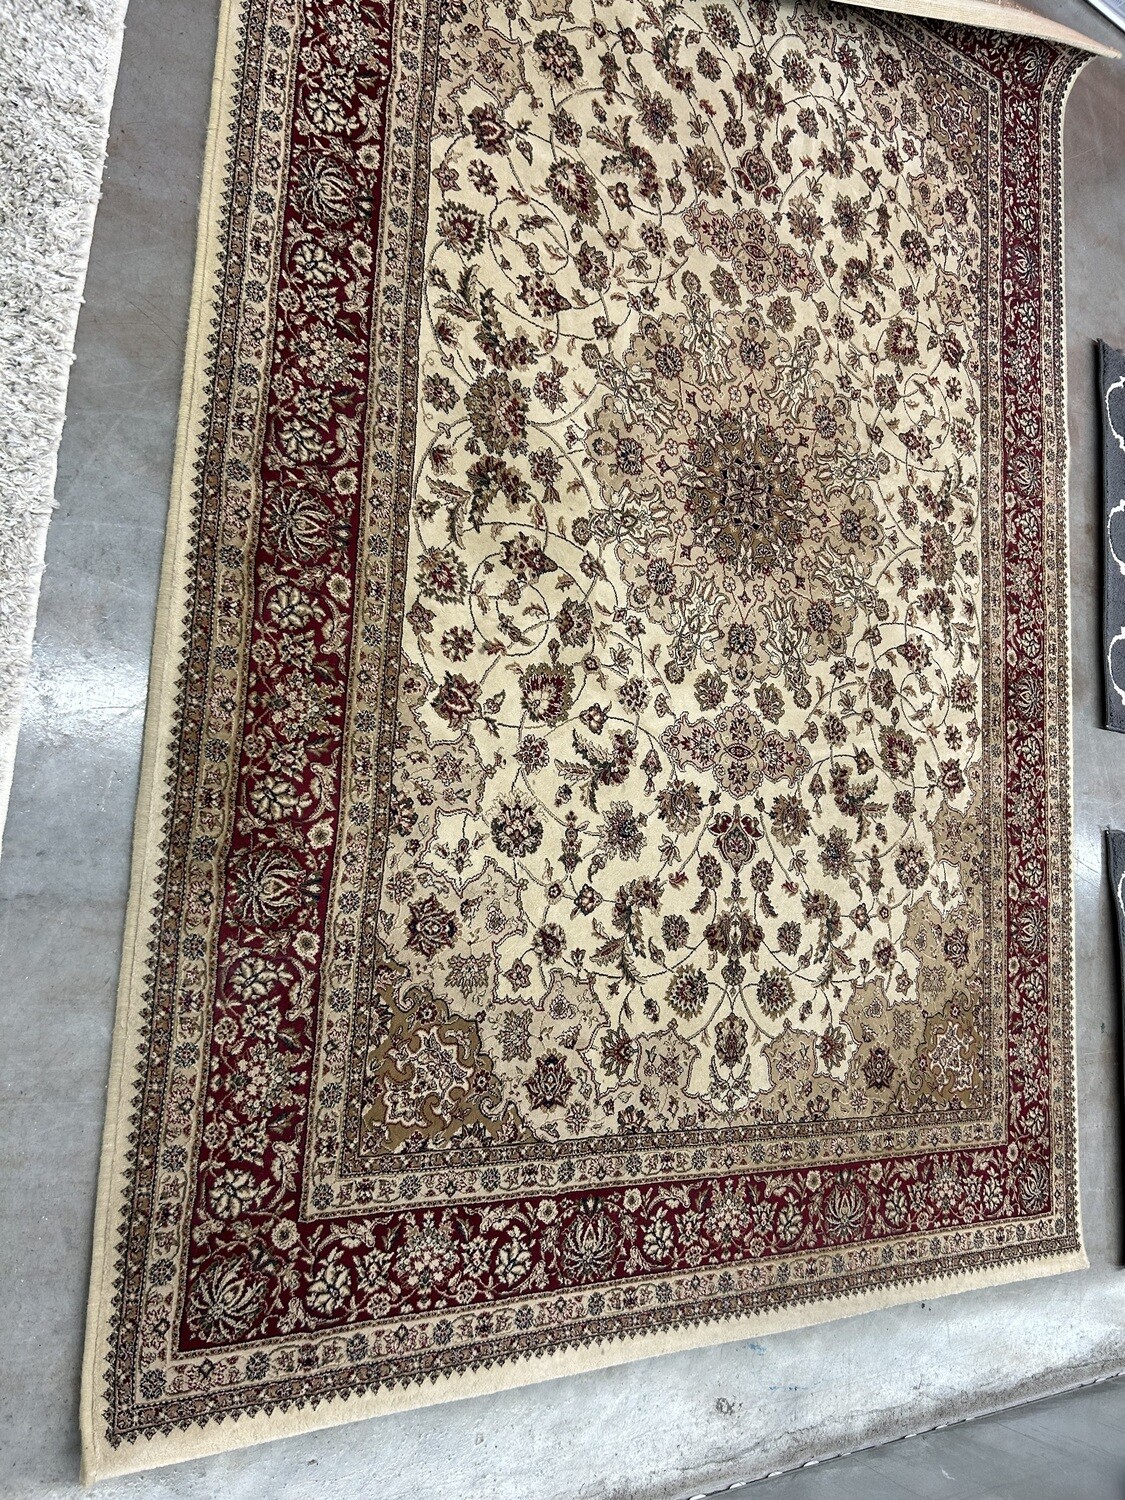 Area Rug: Burgundy/Tan/Brown, 5-3x7-7" #2170 ** 5 mos. to sell reduced from $115